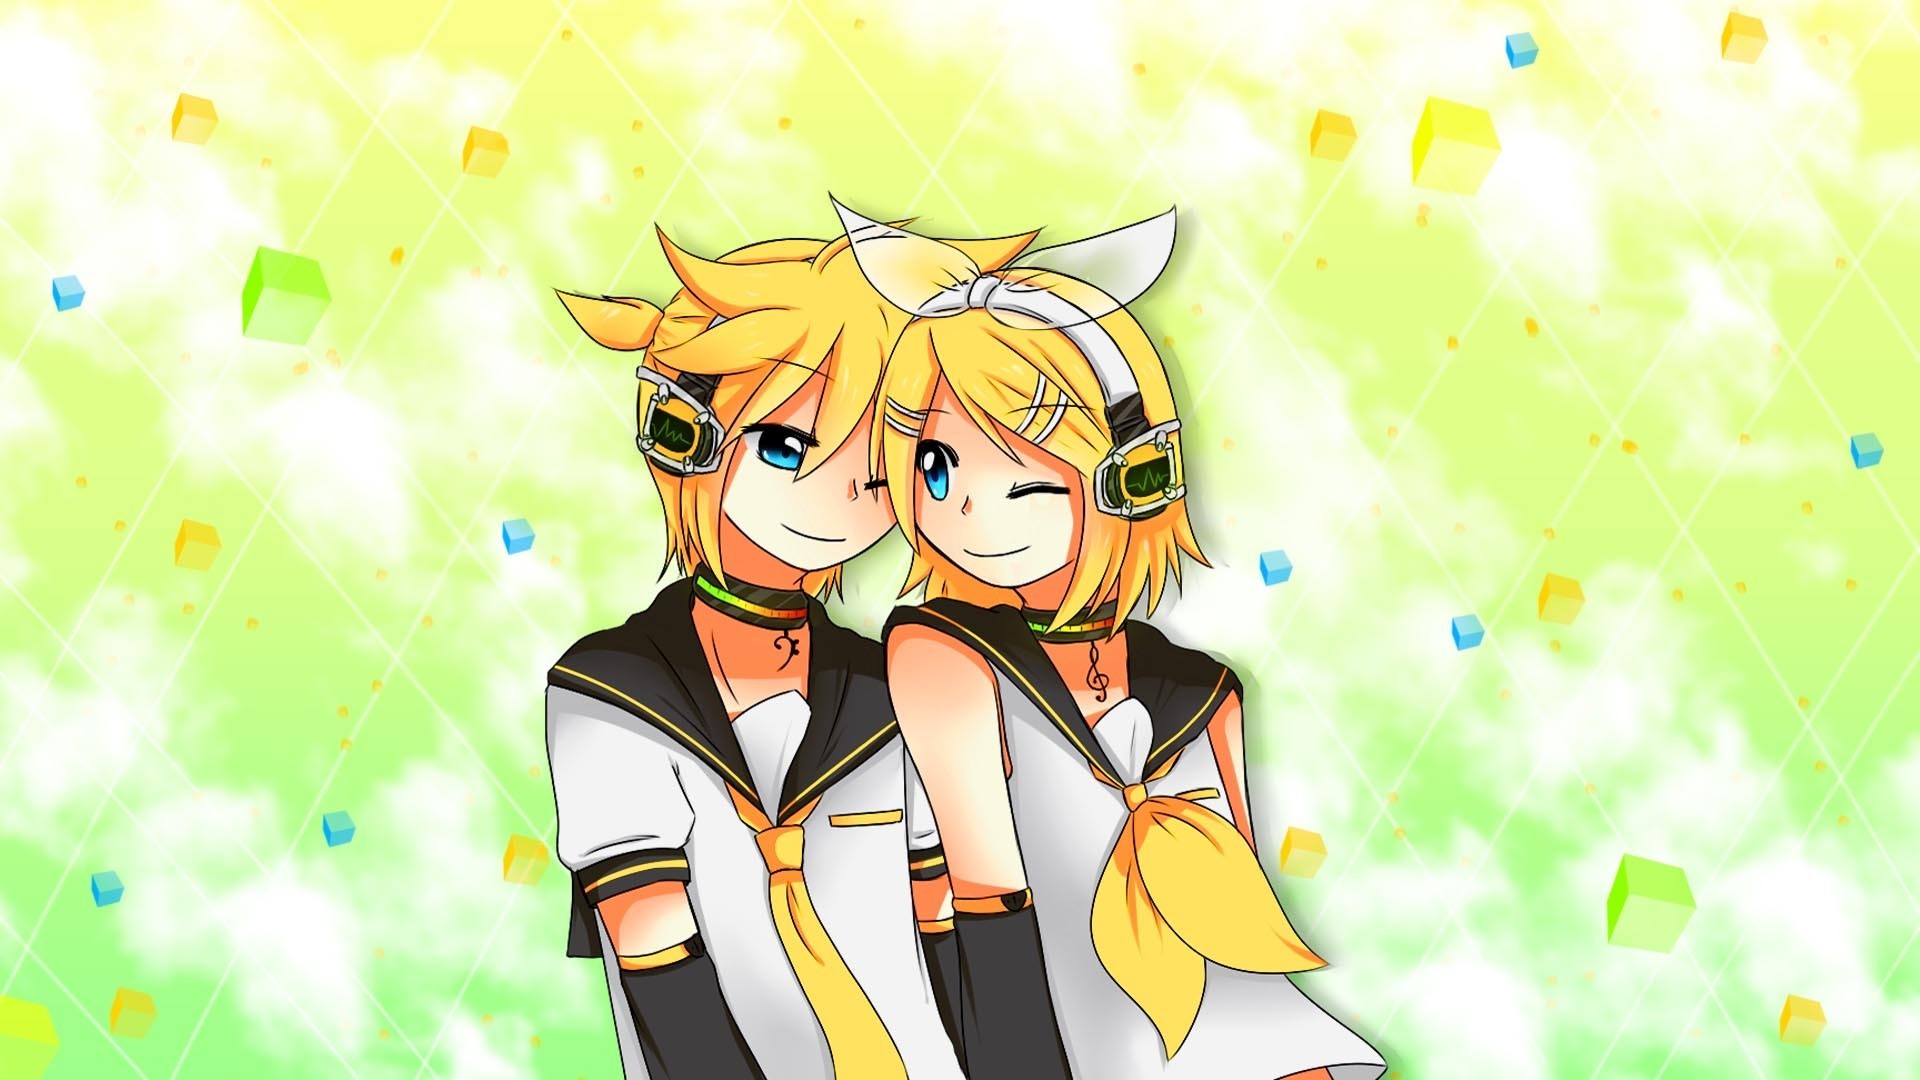 1920x1080 Rin And Len Kagamine Wallpaper Blondes Vocaloid Kagamine Rin Kagamine Len Aqua Eyes Vocaloid 1920x1080